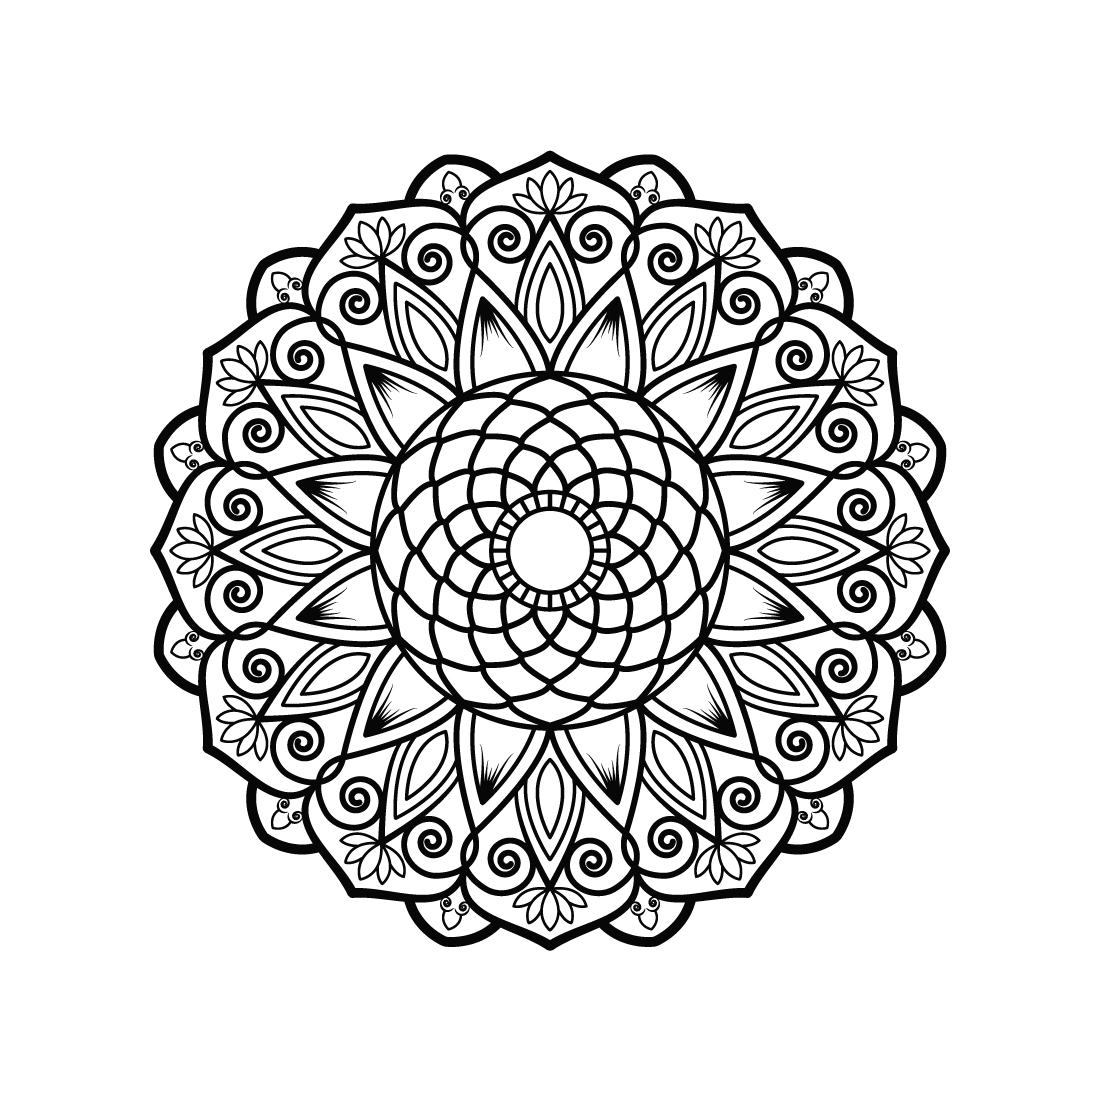 Bundle of 10 Relaxation Mandalas Coloring Book Pages